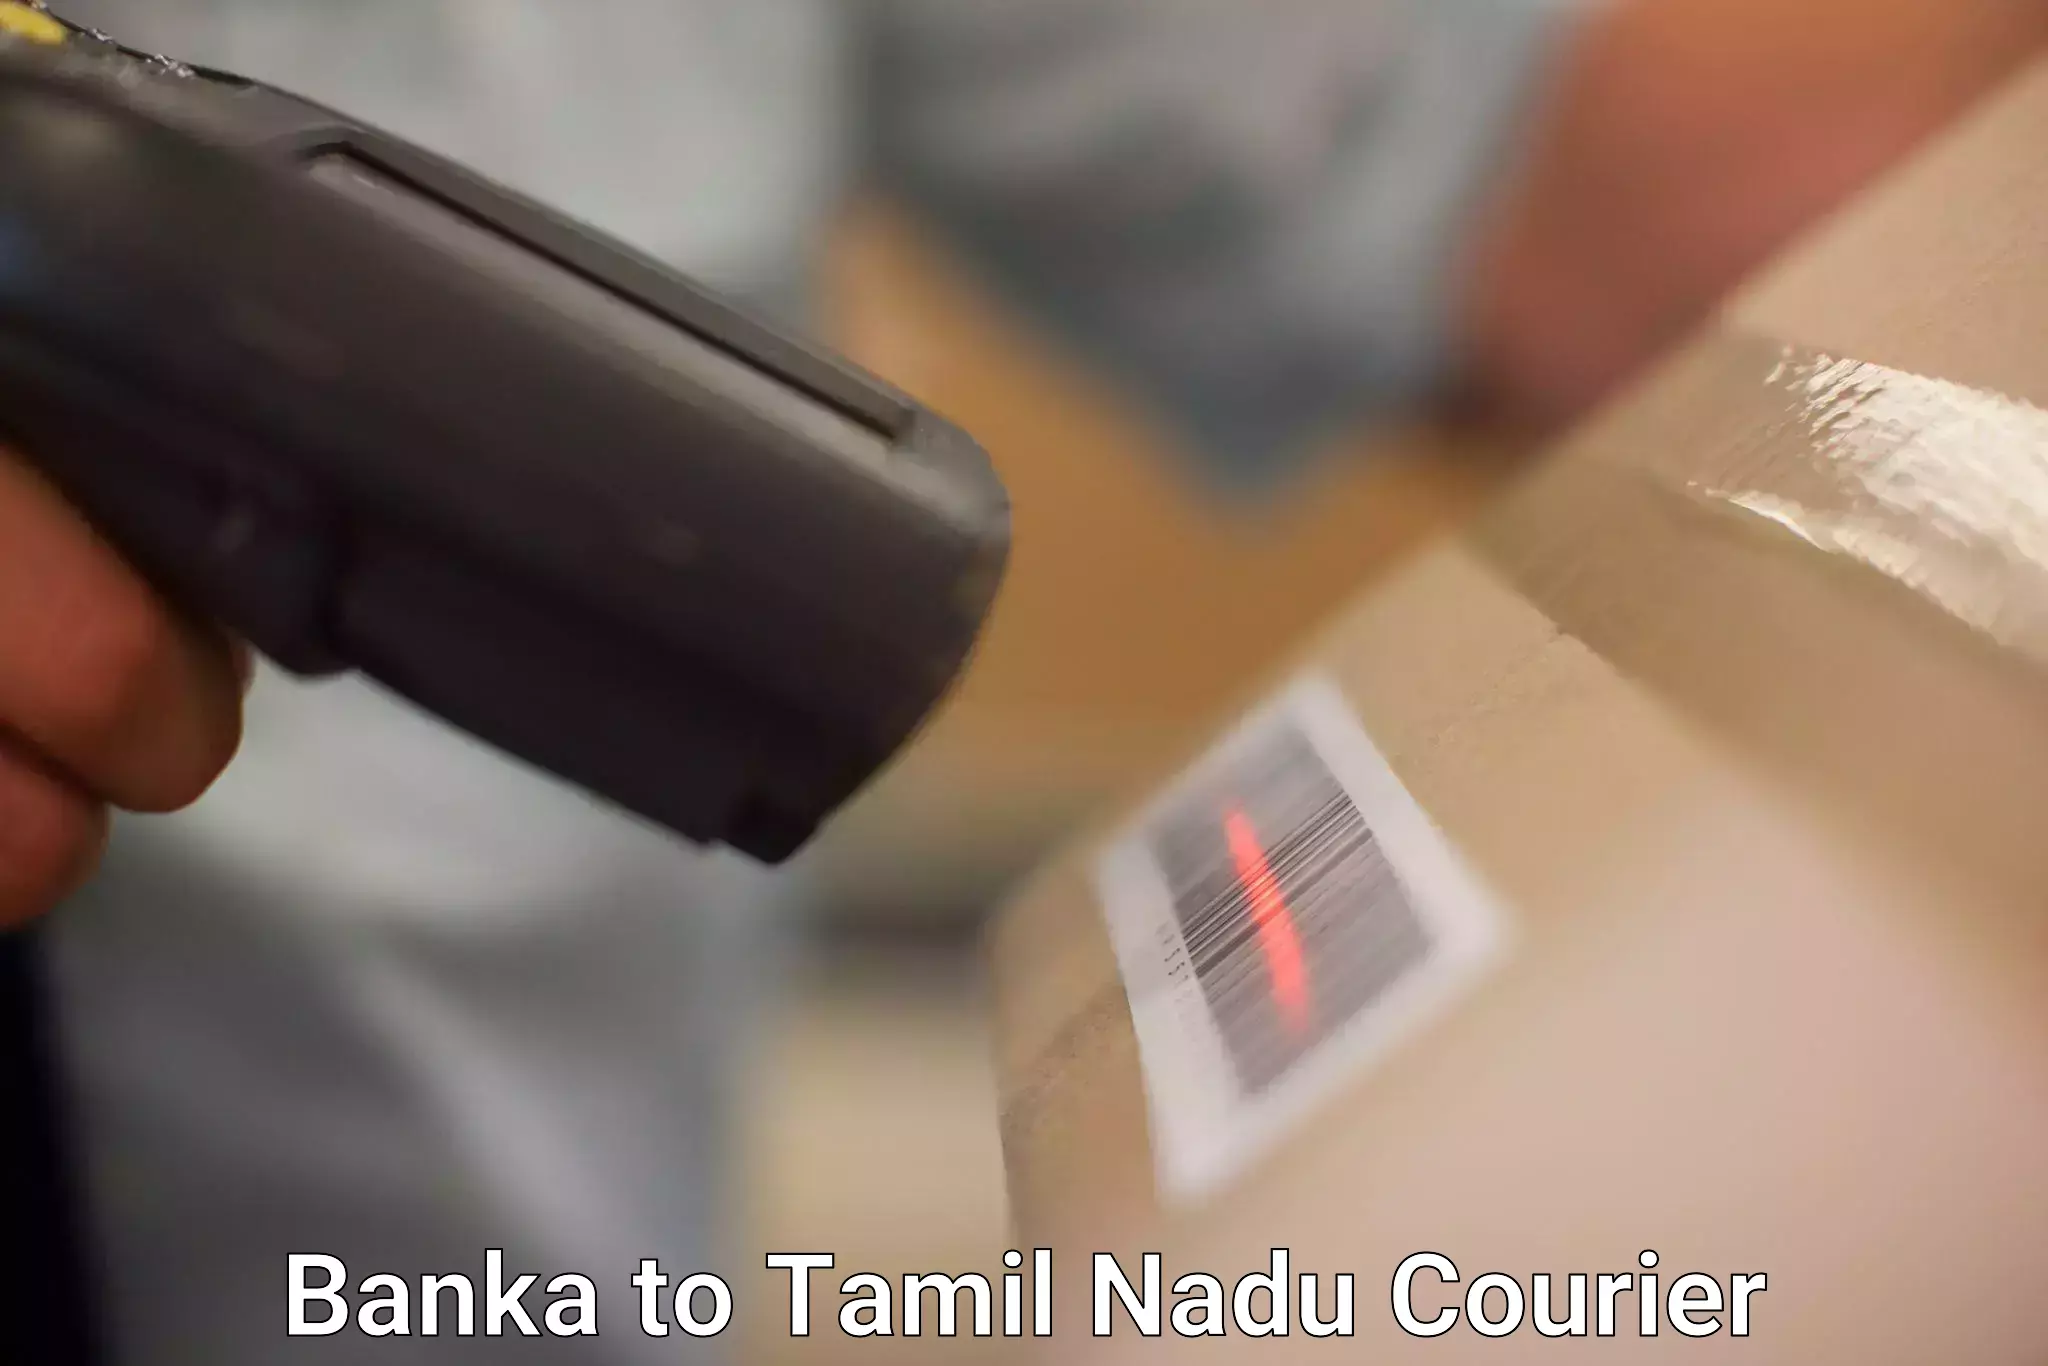 Express courier facilities Banka to Trichy